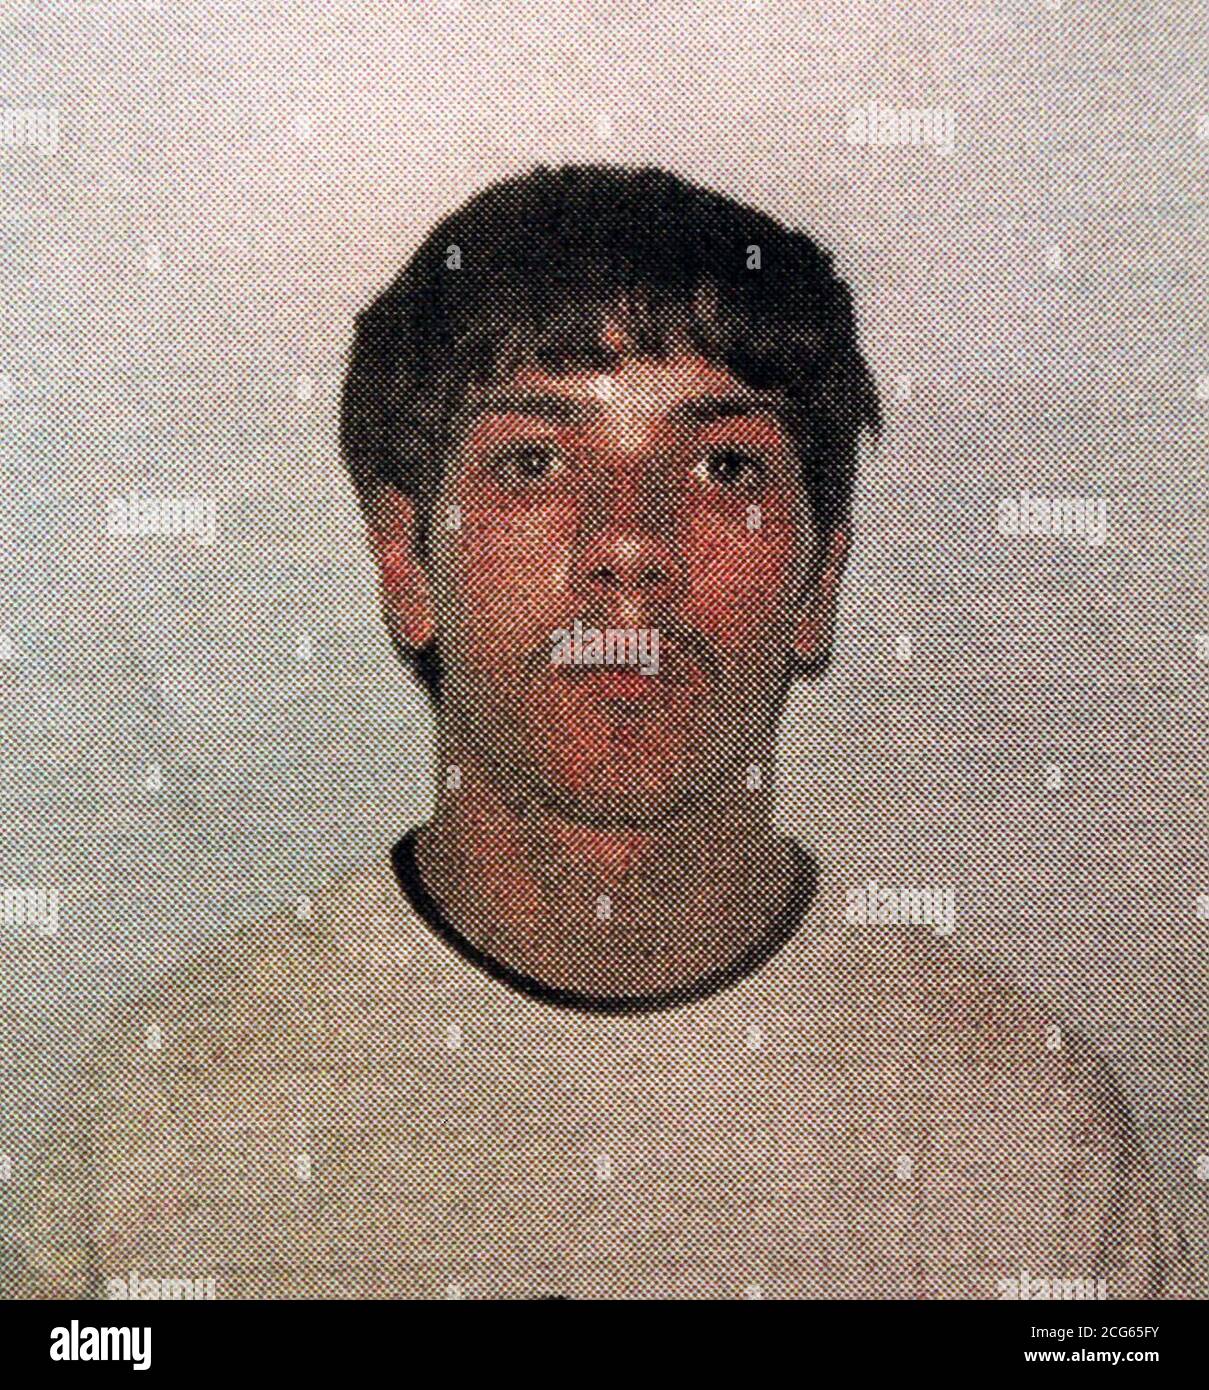 Collect photo of Alan West who was named as one of the juvenile murderers of Timothy Baxter, a law student, who was thrown into the River Thames in an 'act of heartless, gratuitous violence'.  * The other two juvenile members of  the gang were named as Toni Blankson and Shaun Copeland. The six gang members were all given life sentences at the Old Bailey.   Stock Photo